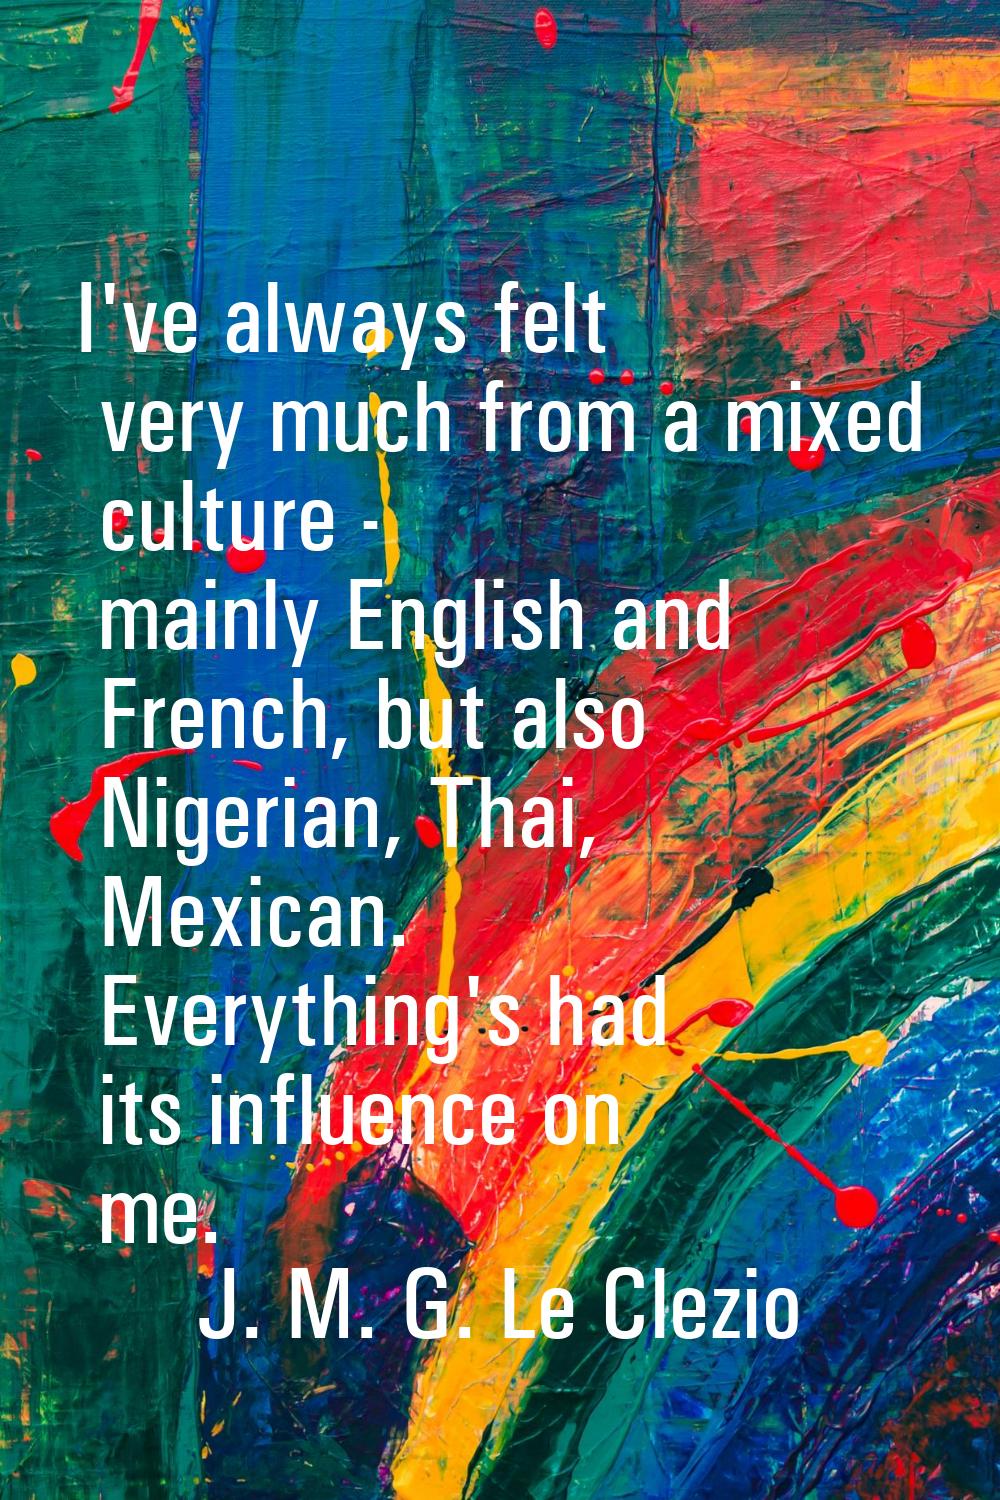 I've always felt very much from a mixed culture - mainly English and French, but also Nigerian, Tha